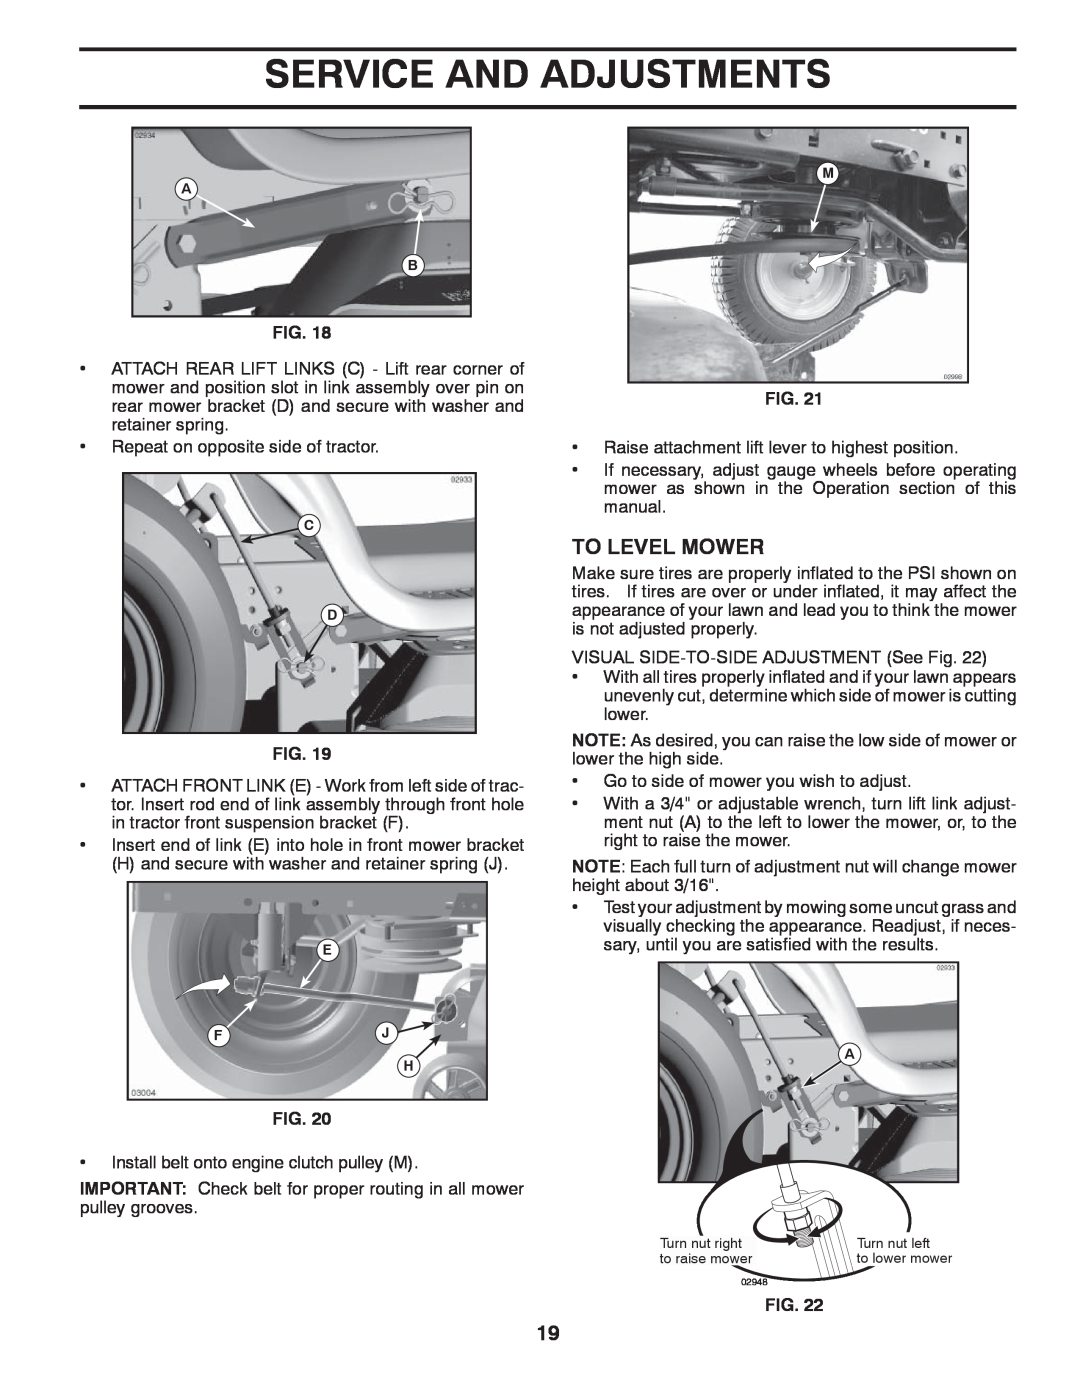 Husqvarna YTH1542XPT owner manual To Level Mower, Service And Adjustments, Turn nut right, Turn nut left, to raise mower 